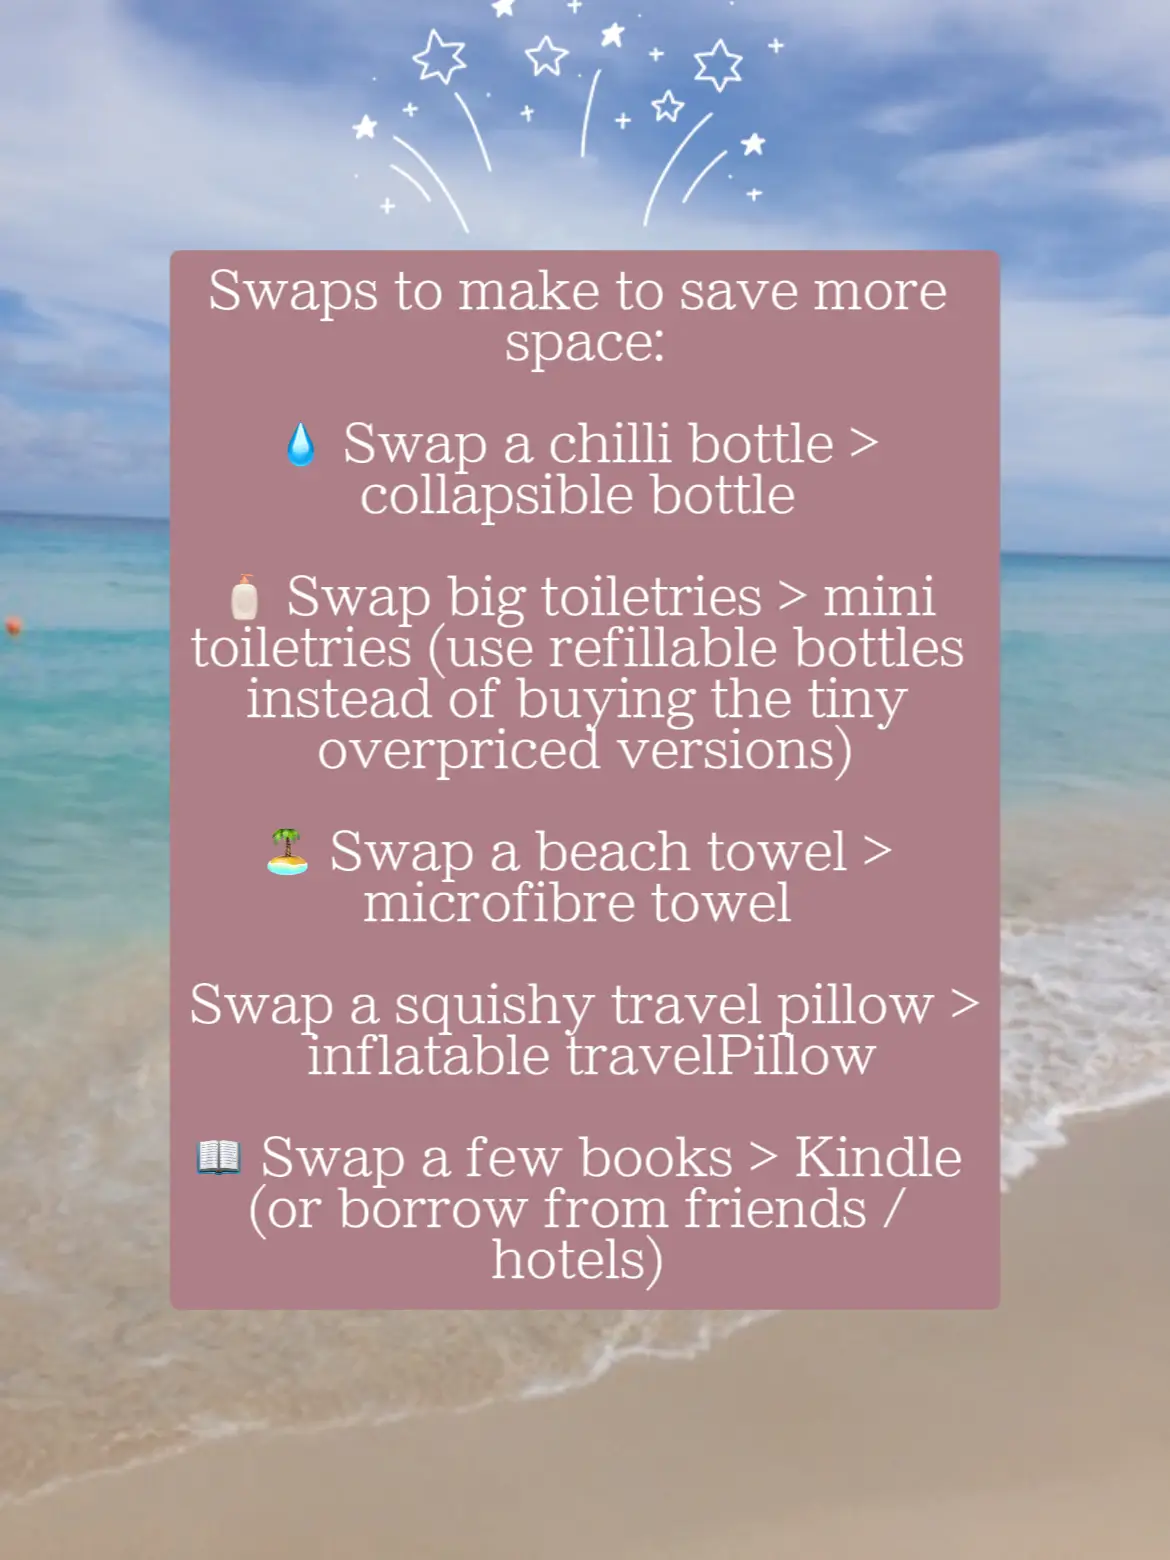 travel hacks for saving space in your luggage - Lemon8 Search